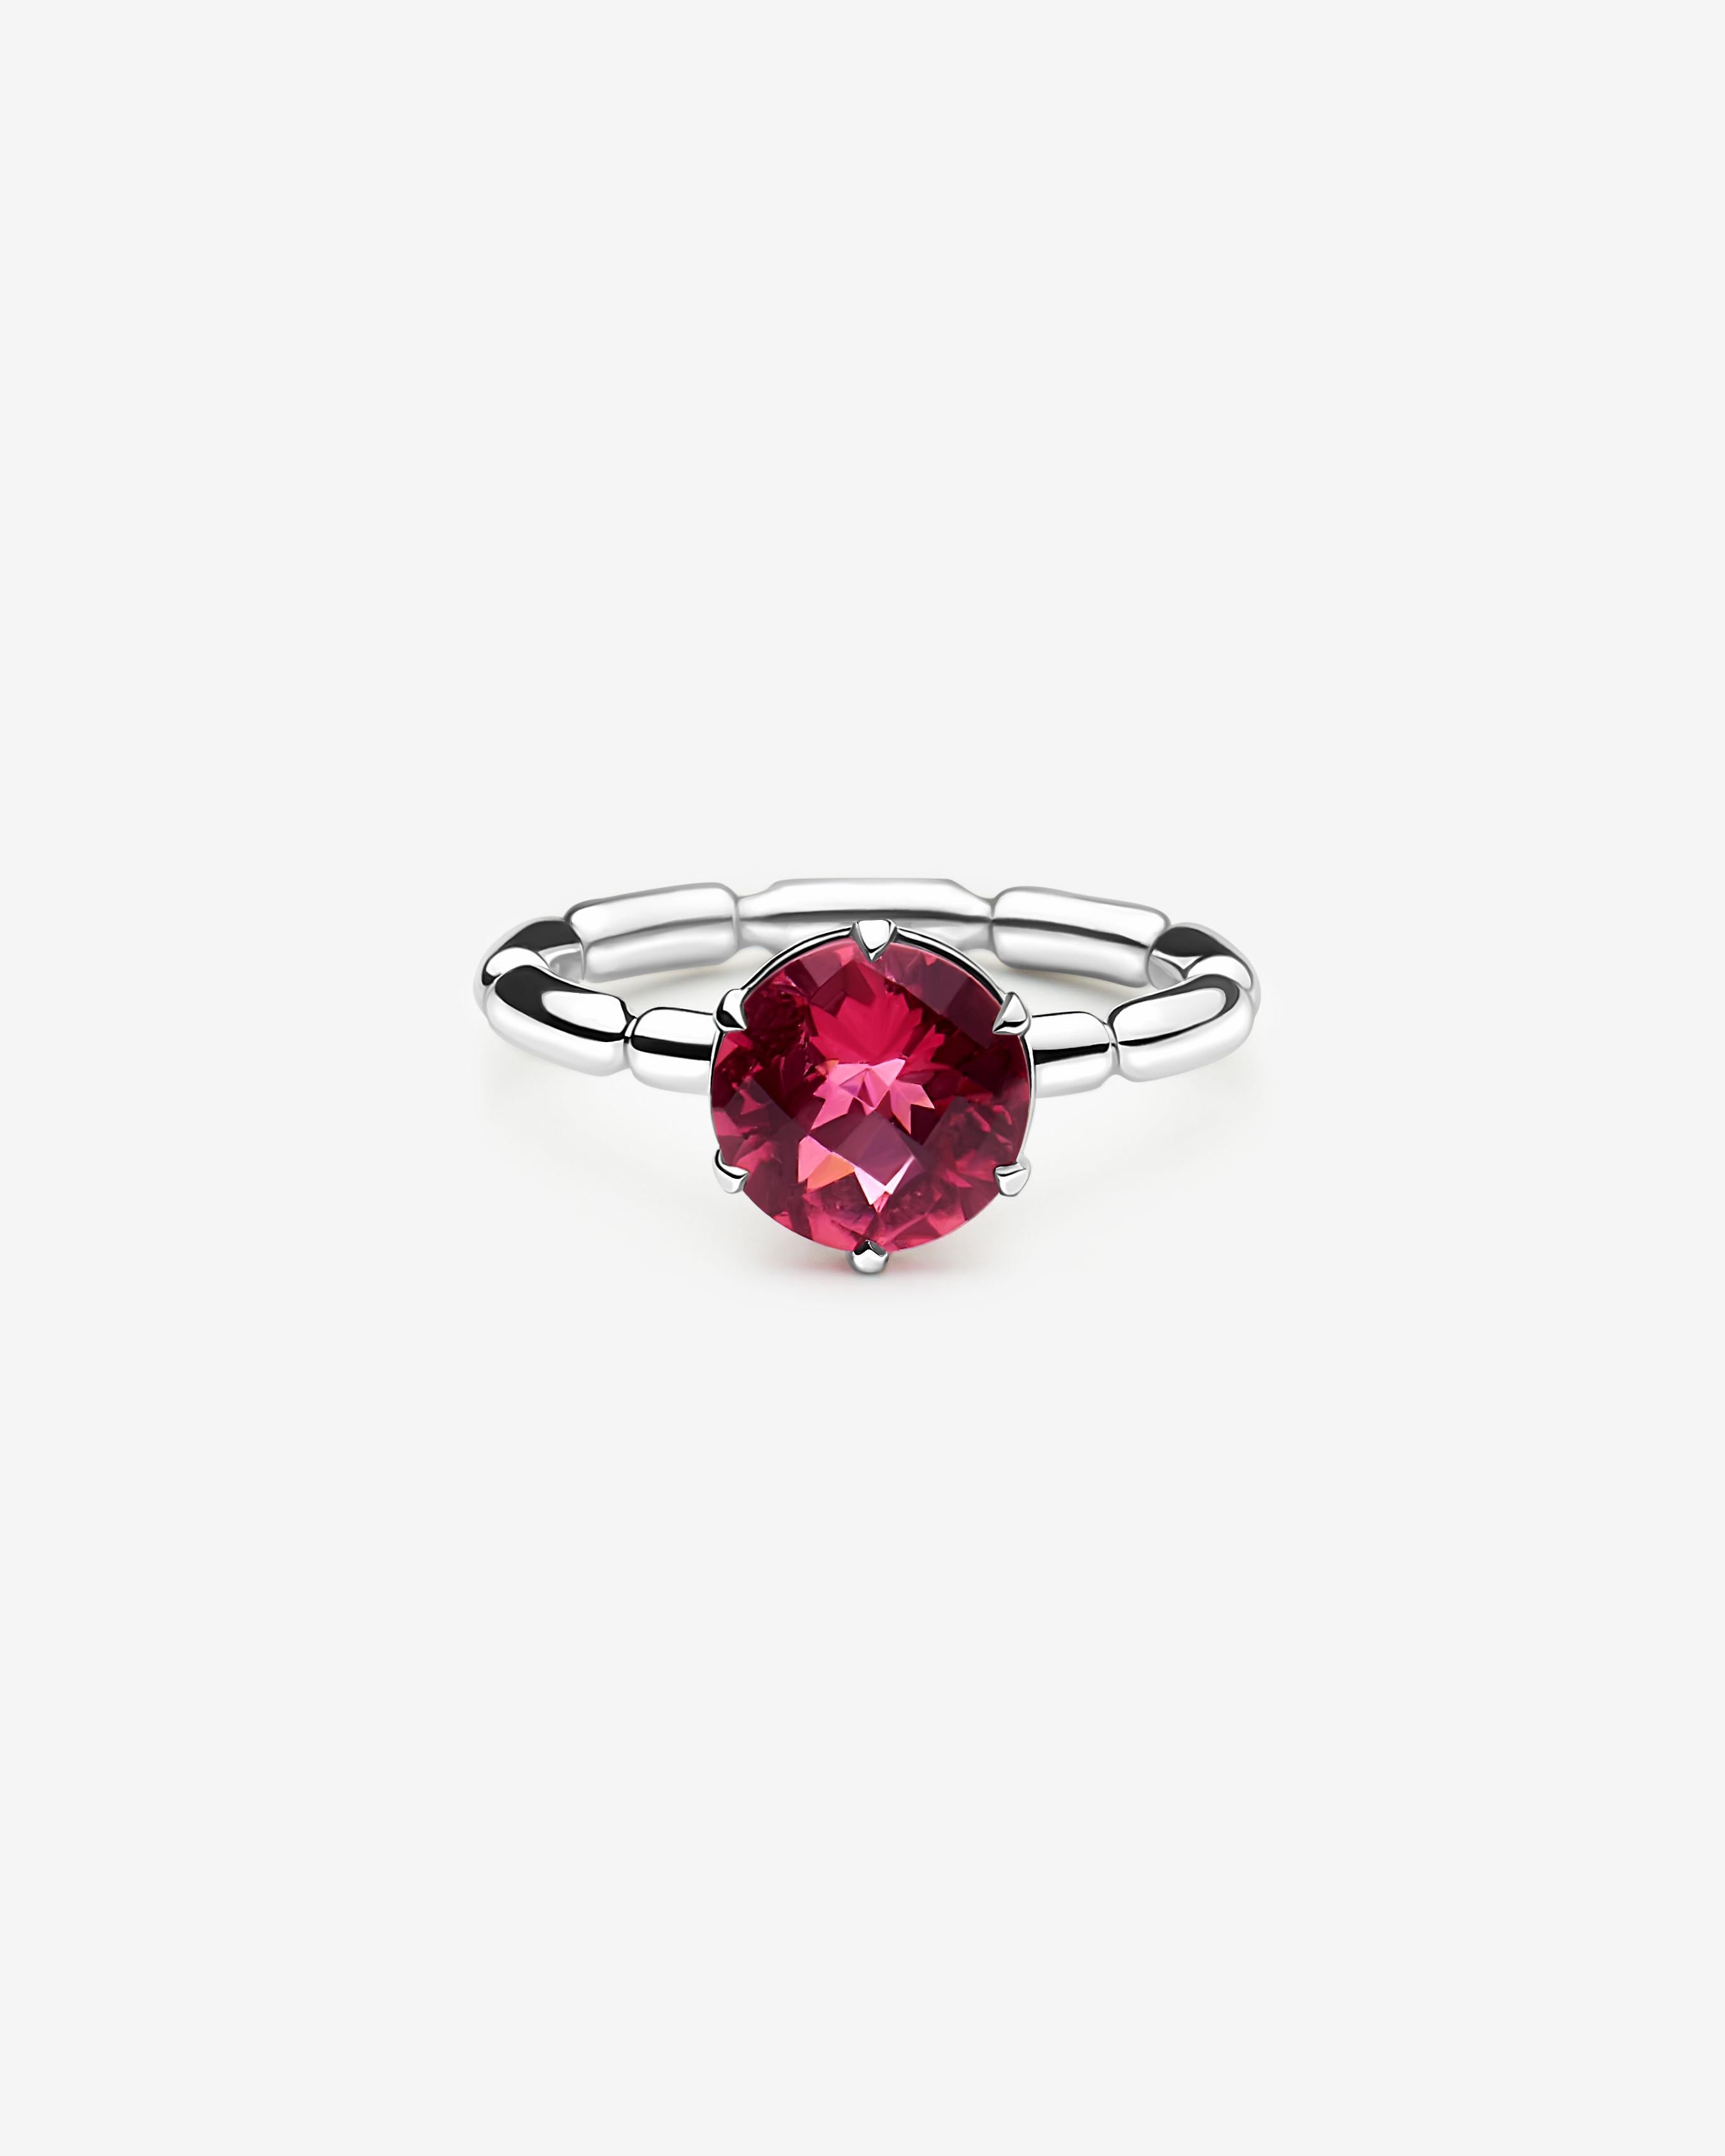 For Sale:  14k White Gold Solitaire Engagement Ring with 1.80 Carat Round Pink Tourmaline 2